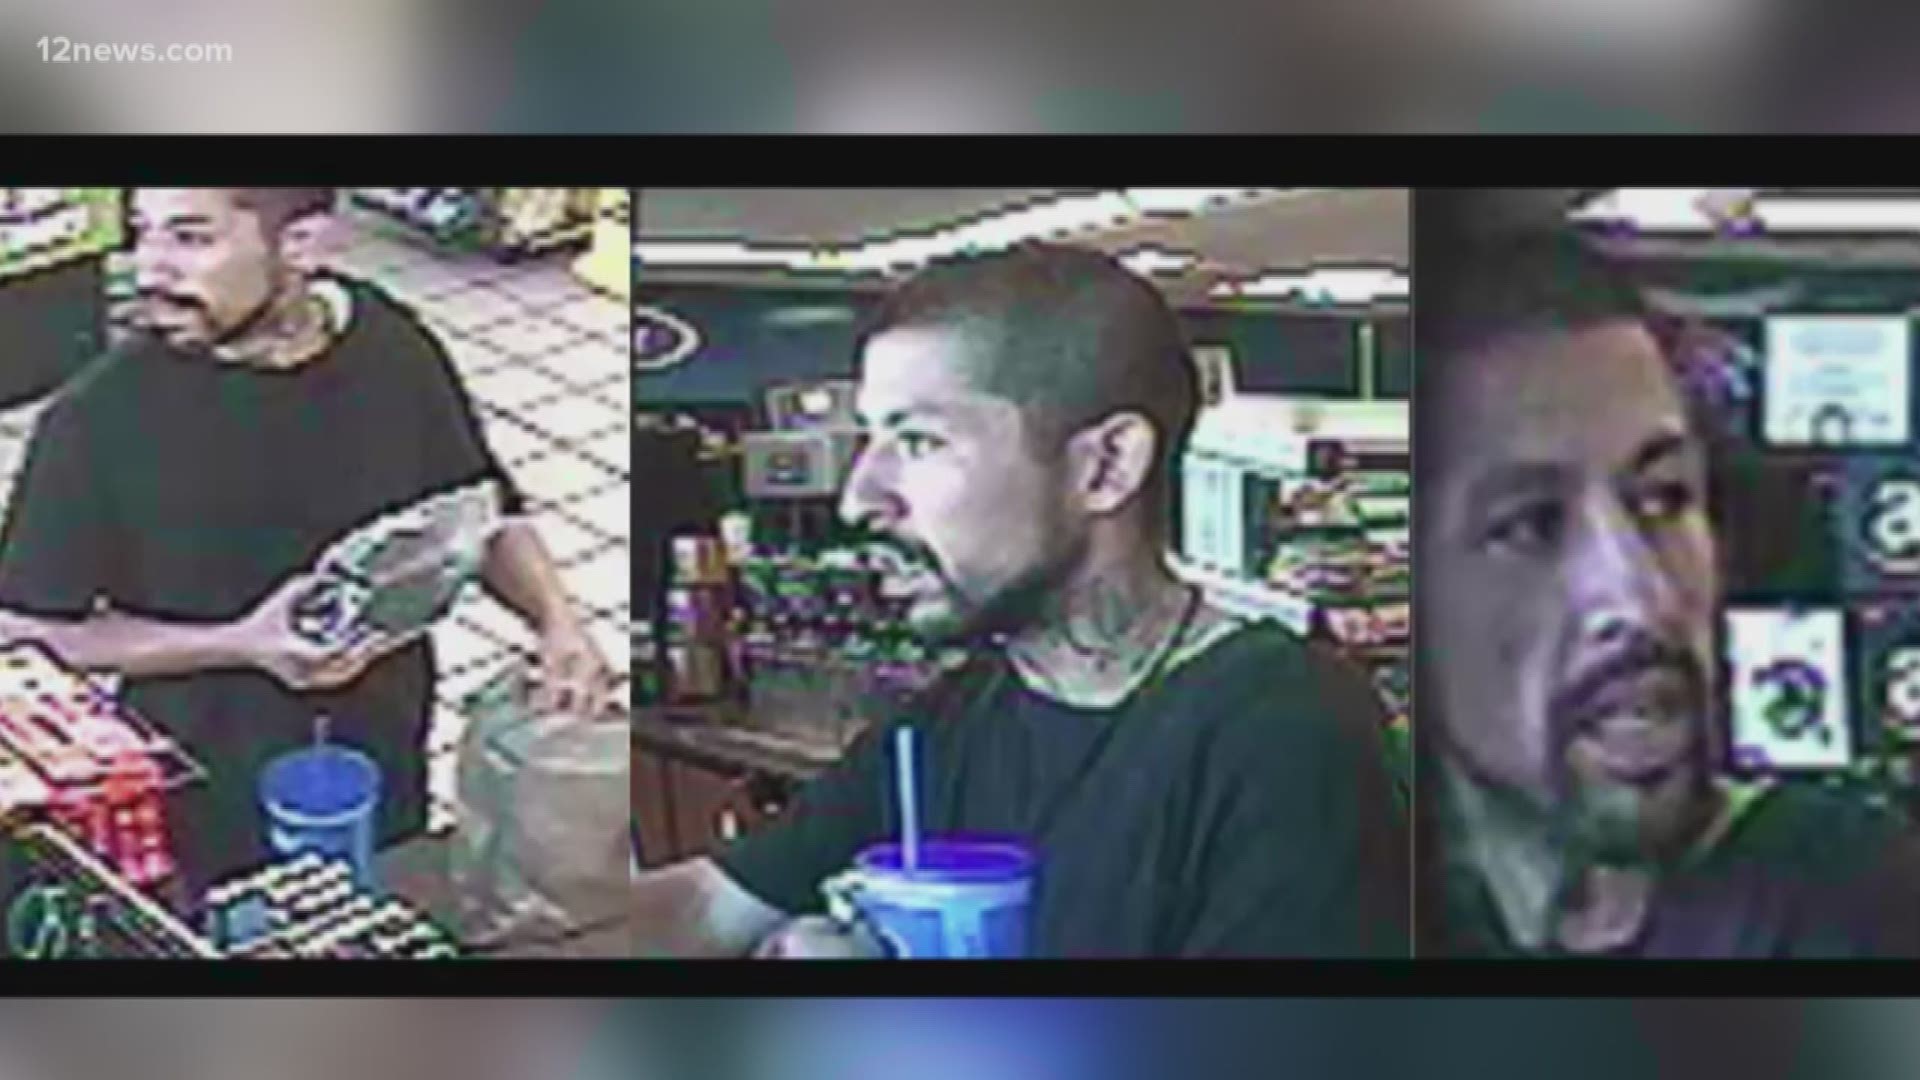 What started as a typical convenience store interaction turned into an armed robbery at 15th Avenue and McDowell in Phoenix.